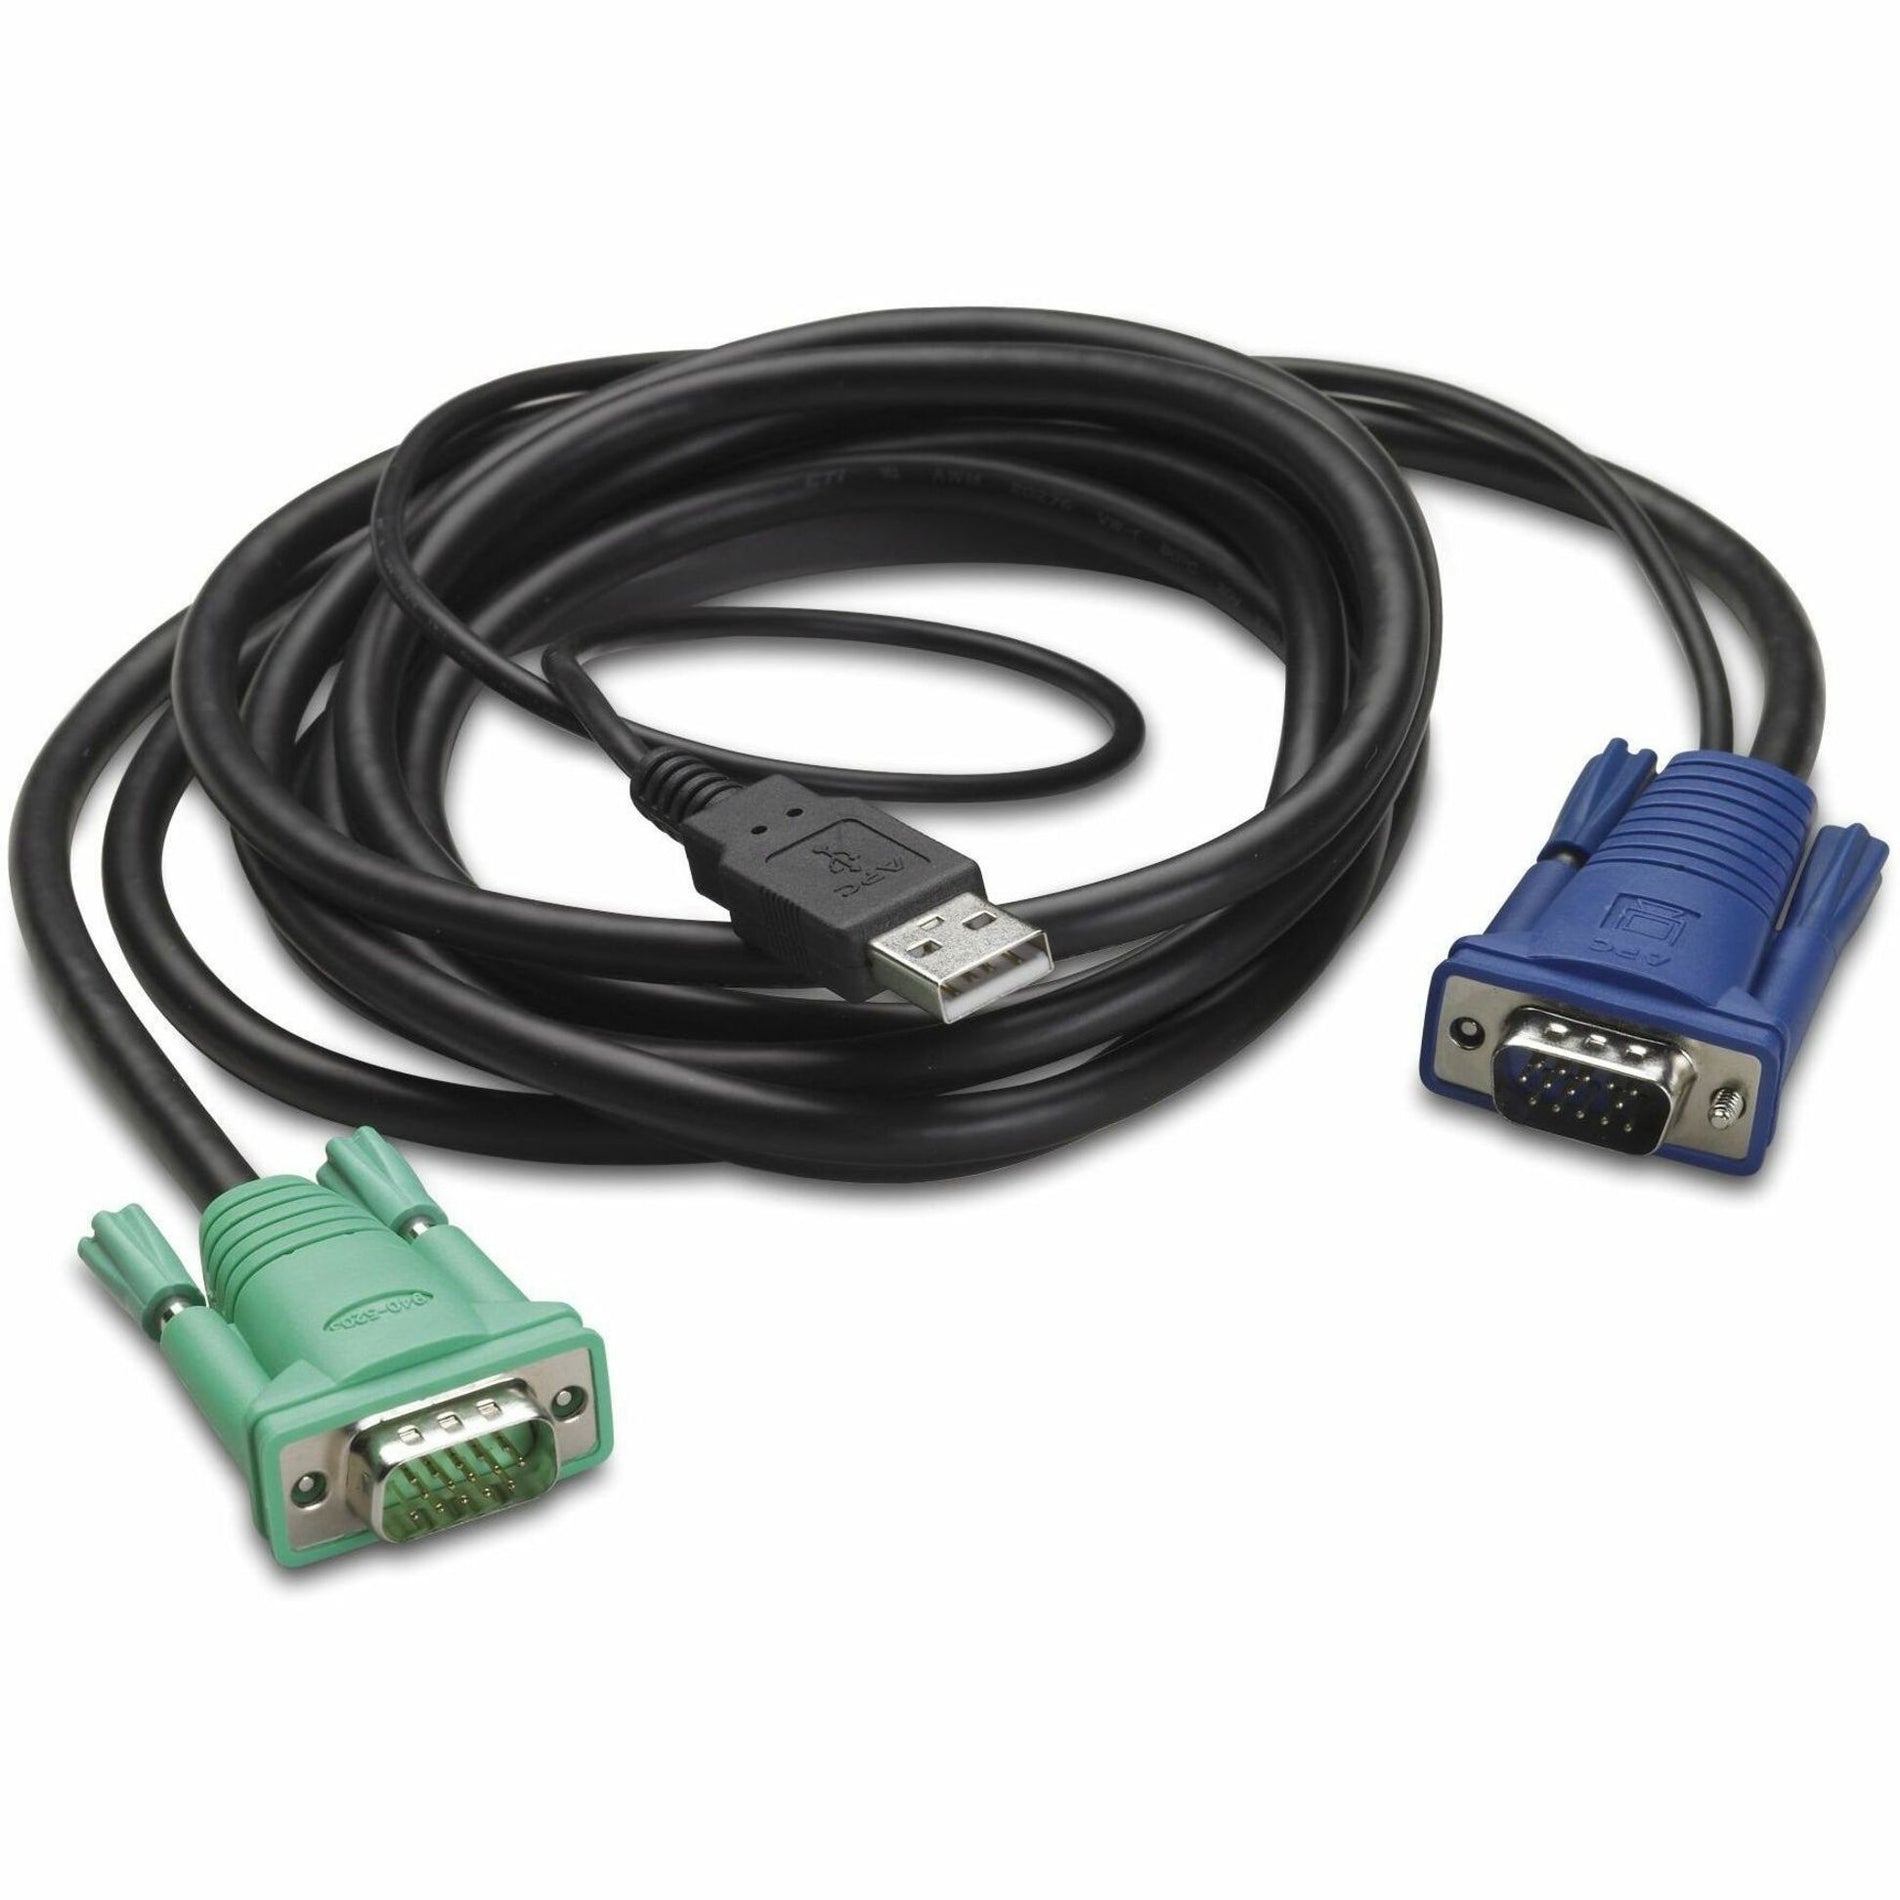 APC AP5822 Integrated Rack LCD/KVM USB Cable - 10ft (3m), Copper Conductor, RoHS Certified